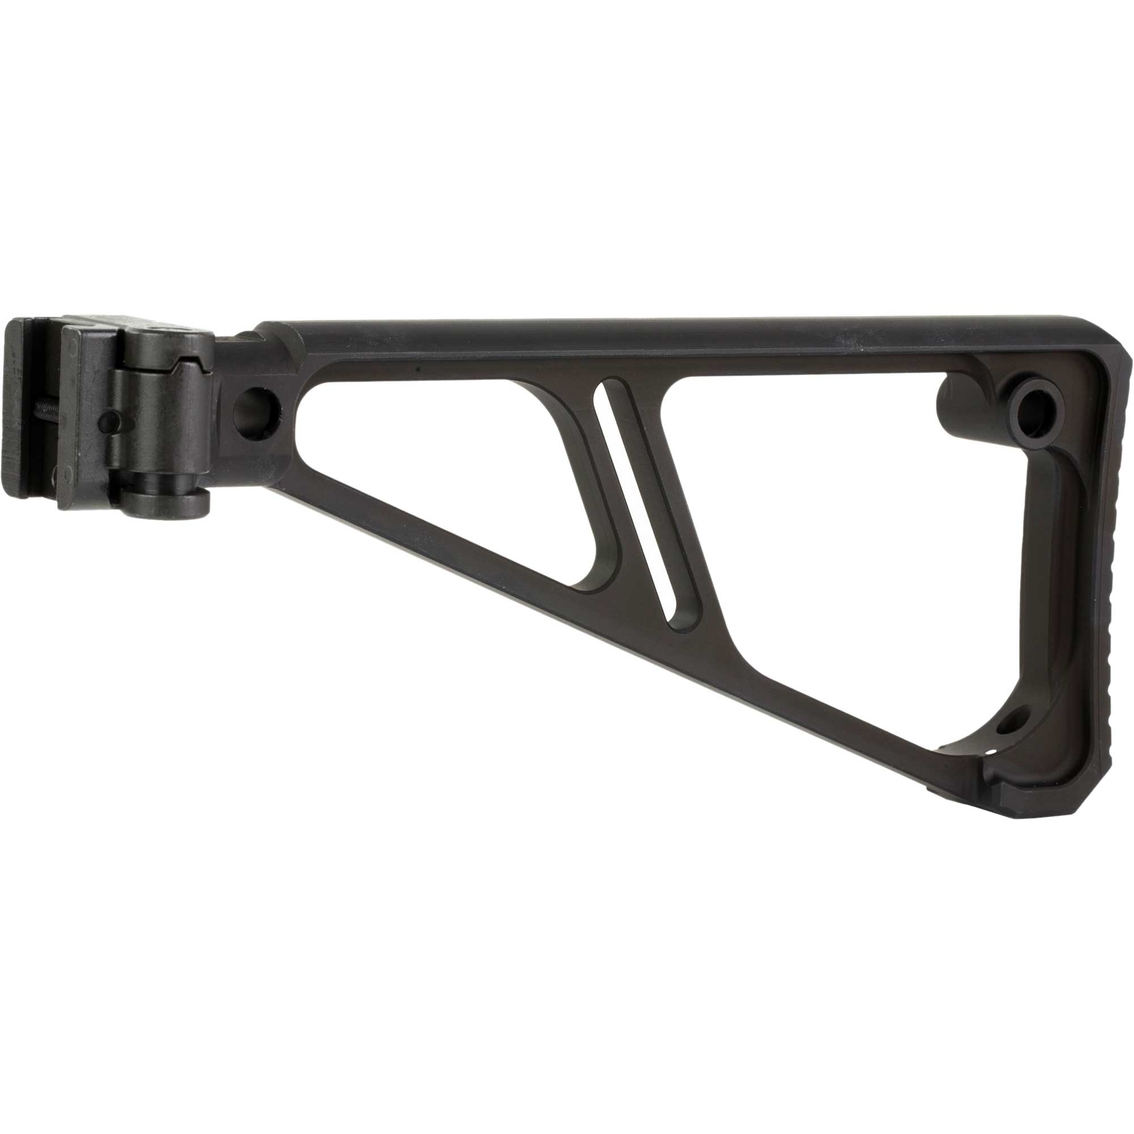 Midwest Industries Folding Stock Fits Picatinny Black - Image 3 of 3